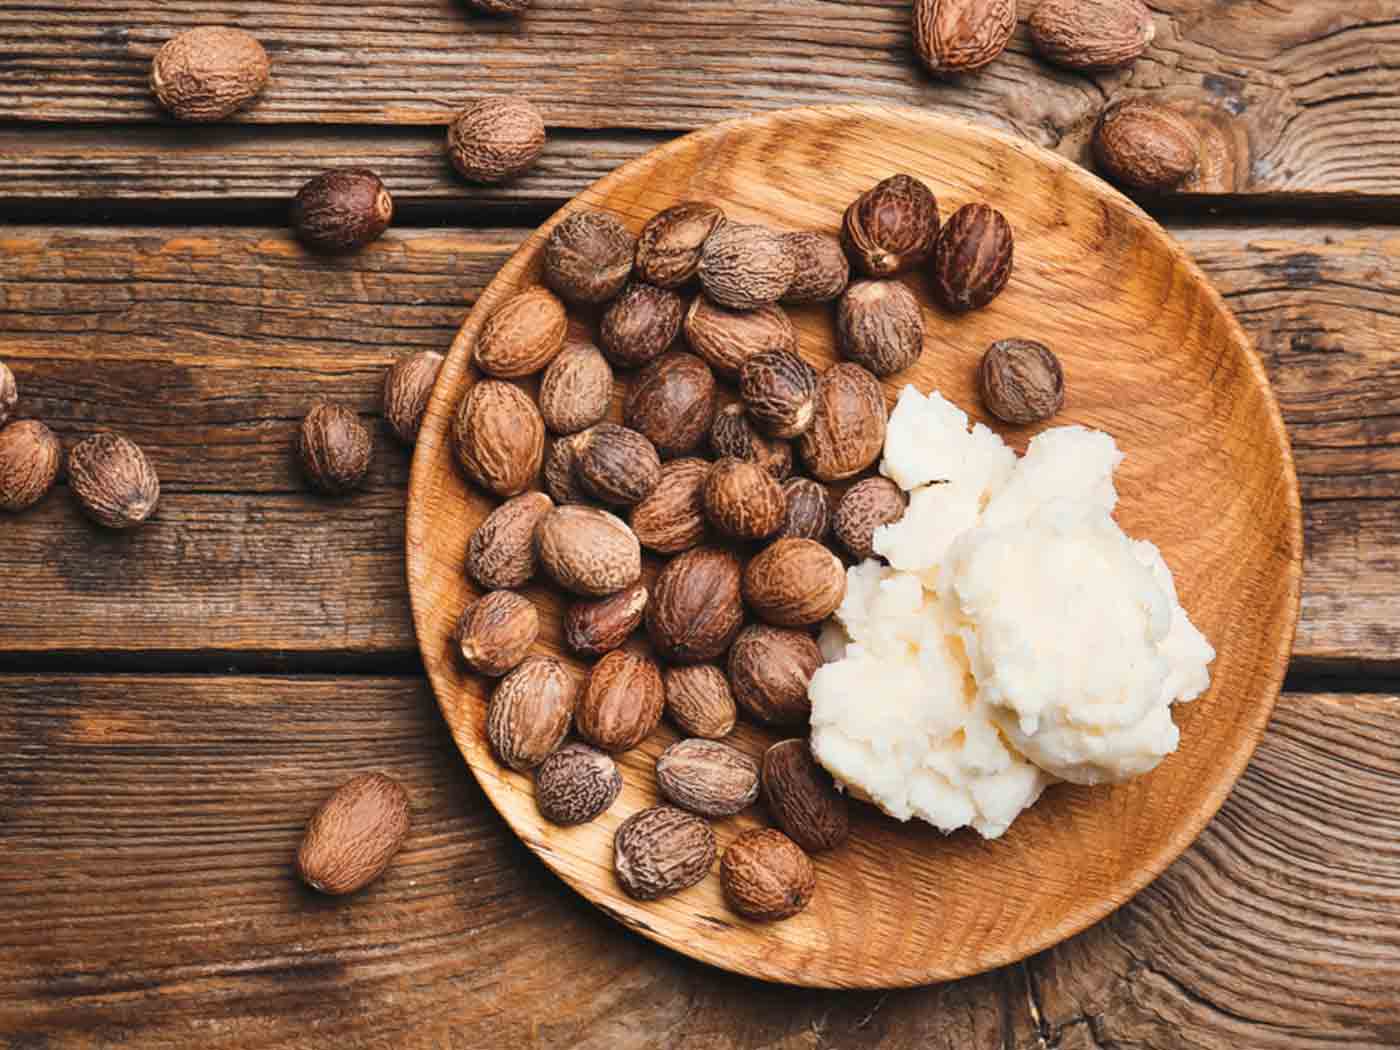 What is the use of Shea butter?